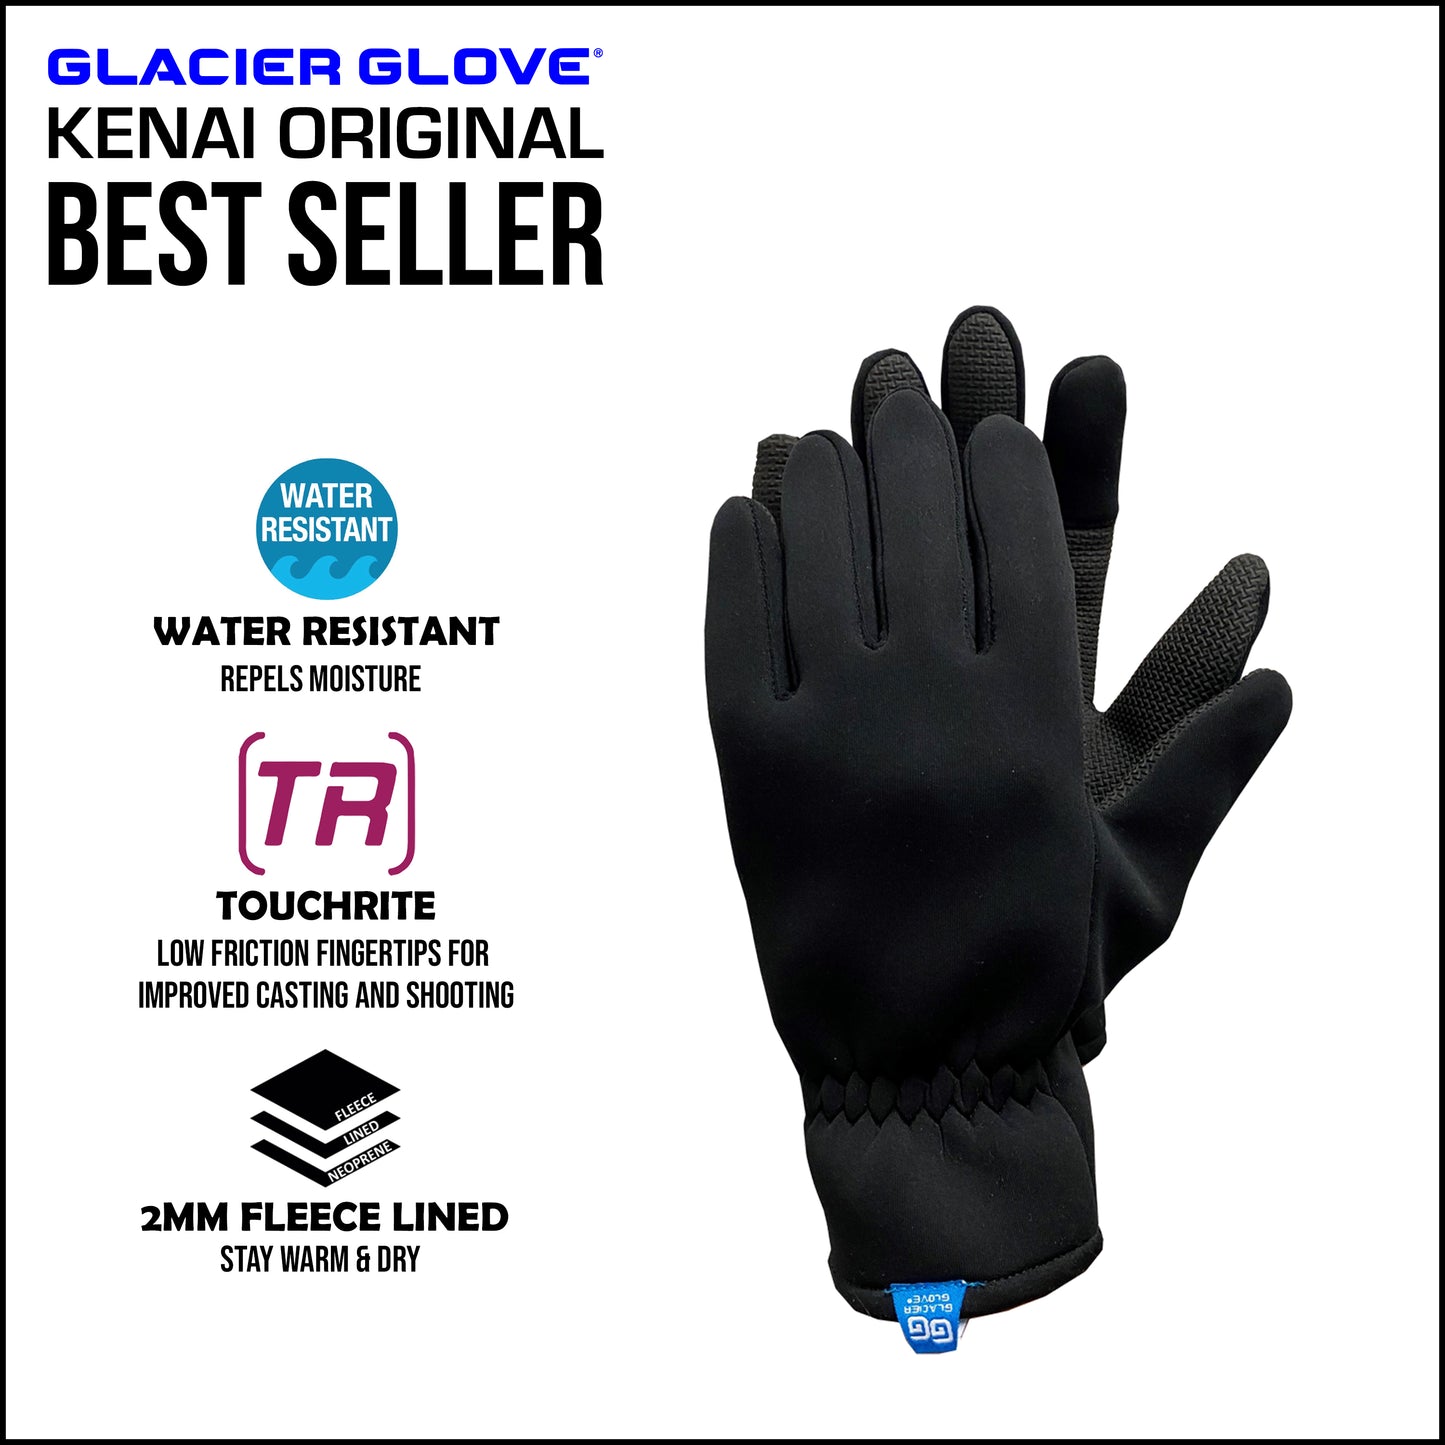 A proven workhorse for over 35 years, the Kenai Original Glove is one of our most popular gloves. This cold weather glove is designed to keep you outdoors while still giving dexterity where you need it. Crafted to withstand any adventure, this glove is perfect for any outdoor enthusiast.